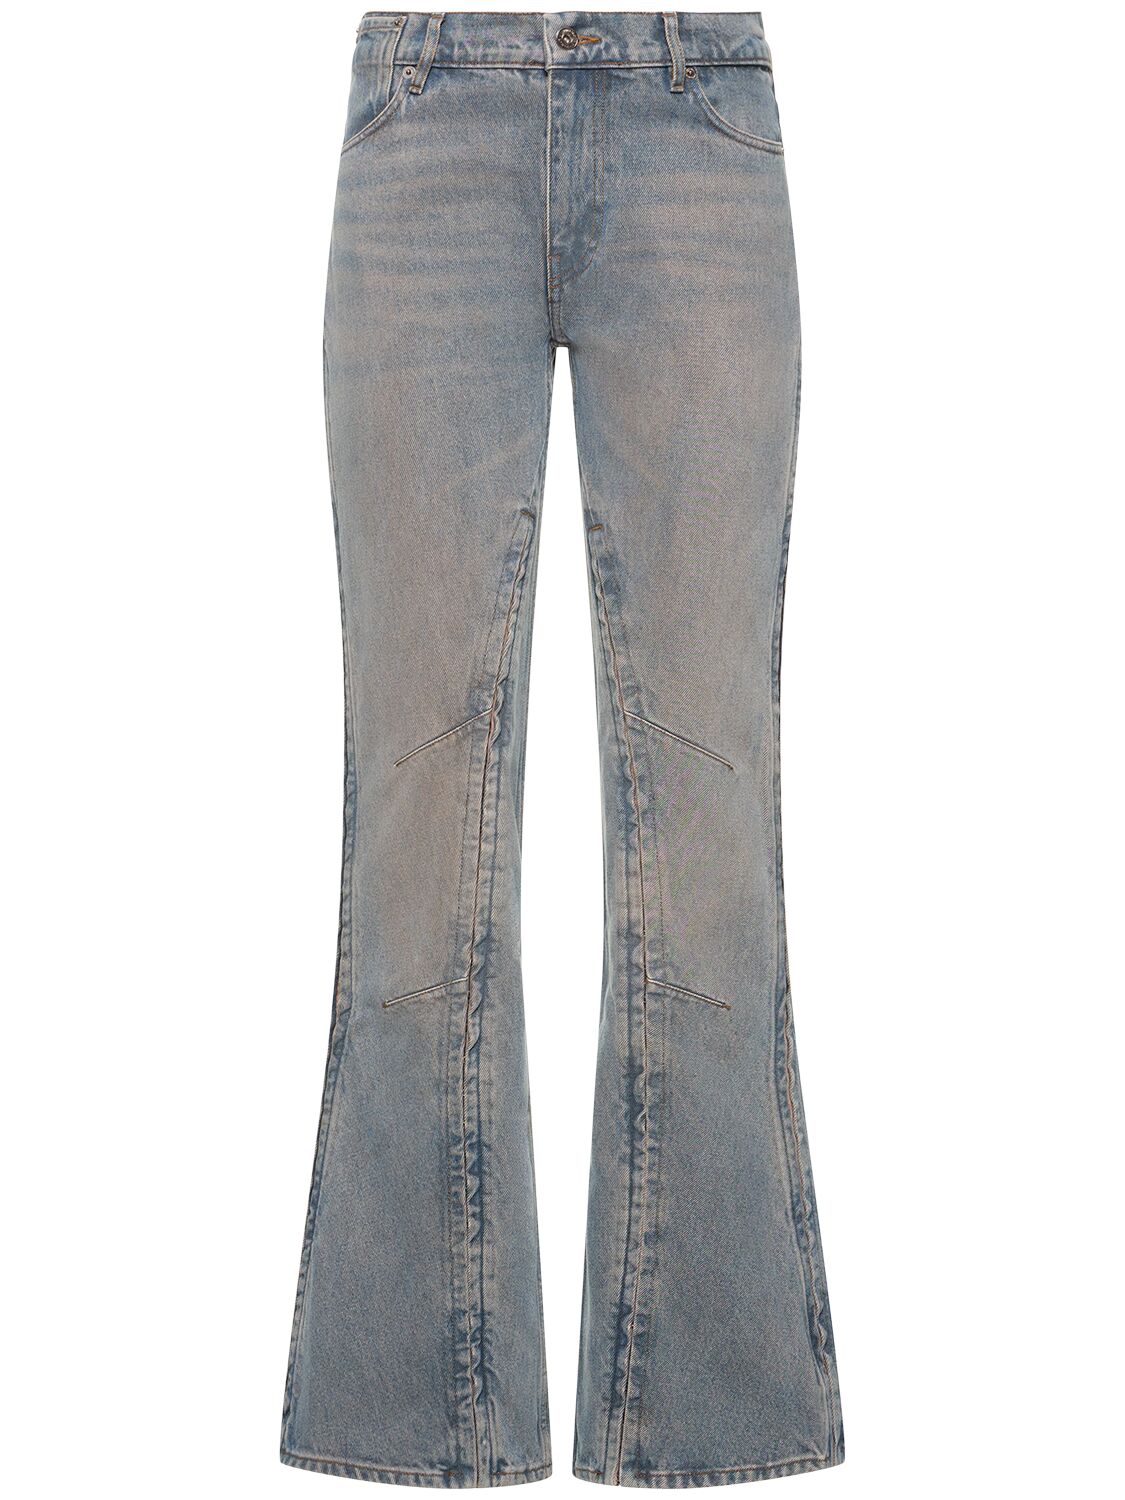 Y/project Denim Low Rise Flared Jeans W/ Slits In Washed Blue